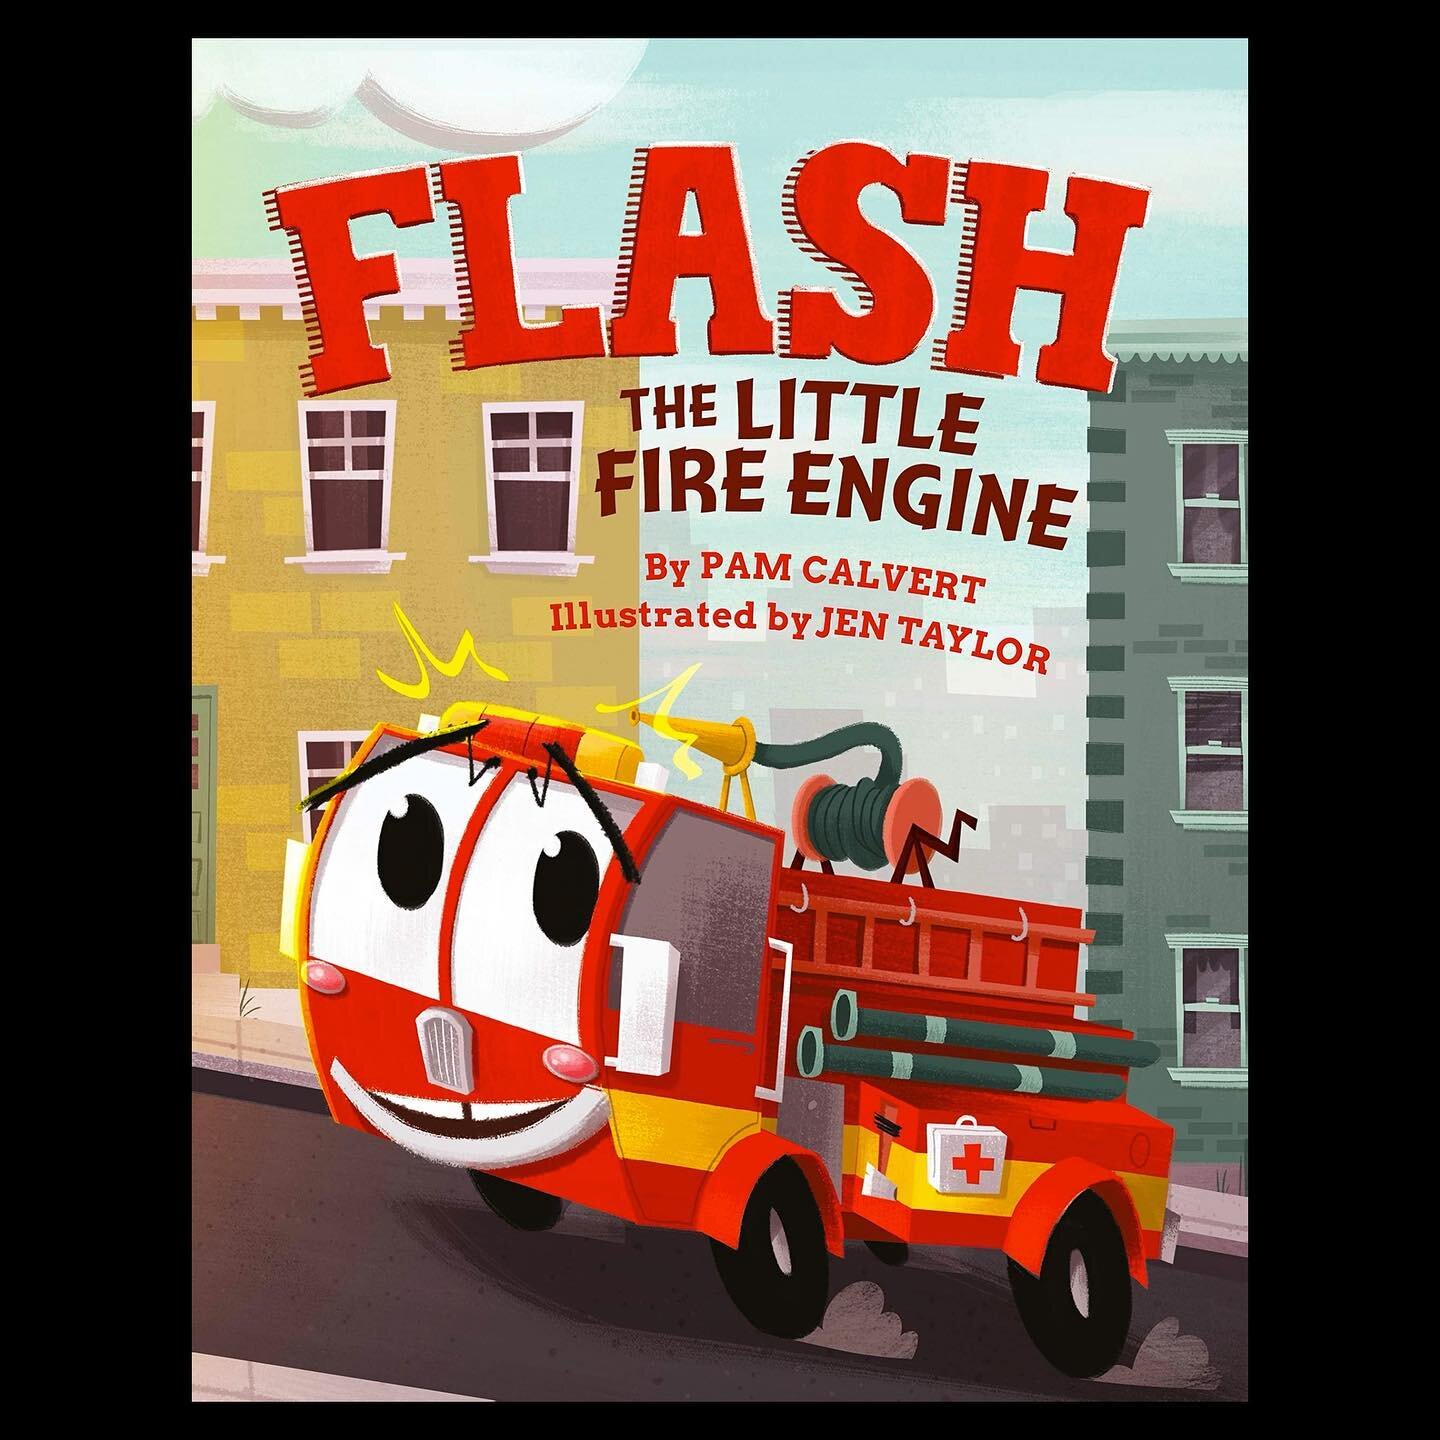 Flash the Little Fire Engine (I illustrated) is part of the &lsquo;Kid&rsquo;s Kindle Book Deals&rsquo; promo on Amazon this month! It&rsquo;s just $.99 until 11/30 - go check it out!
.
.
.
@amazonpublishing @amazon @pamcalvertbooks #amazon #kindle #